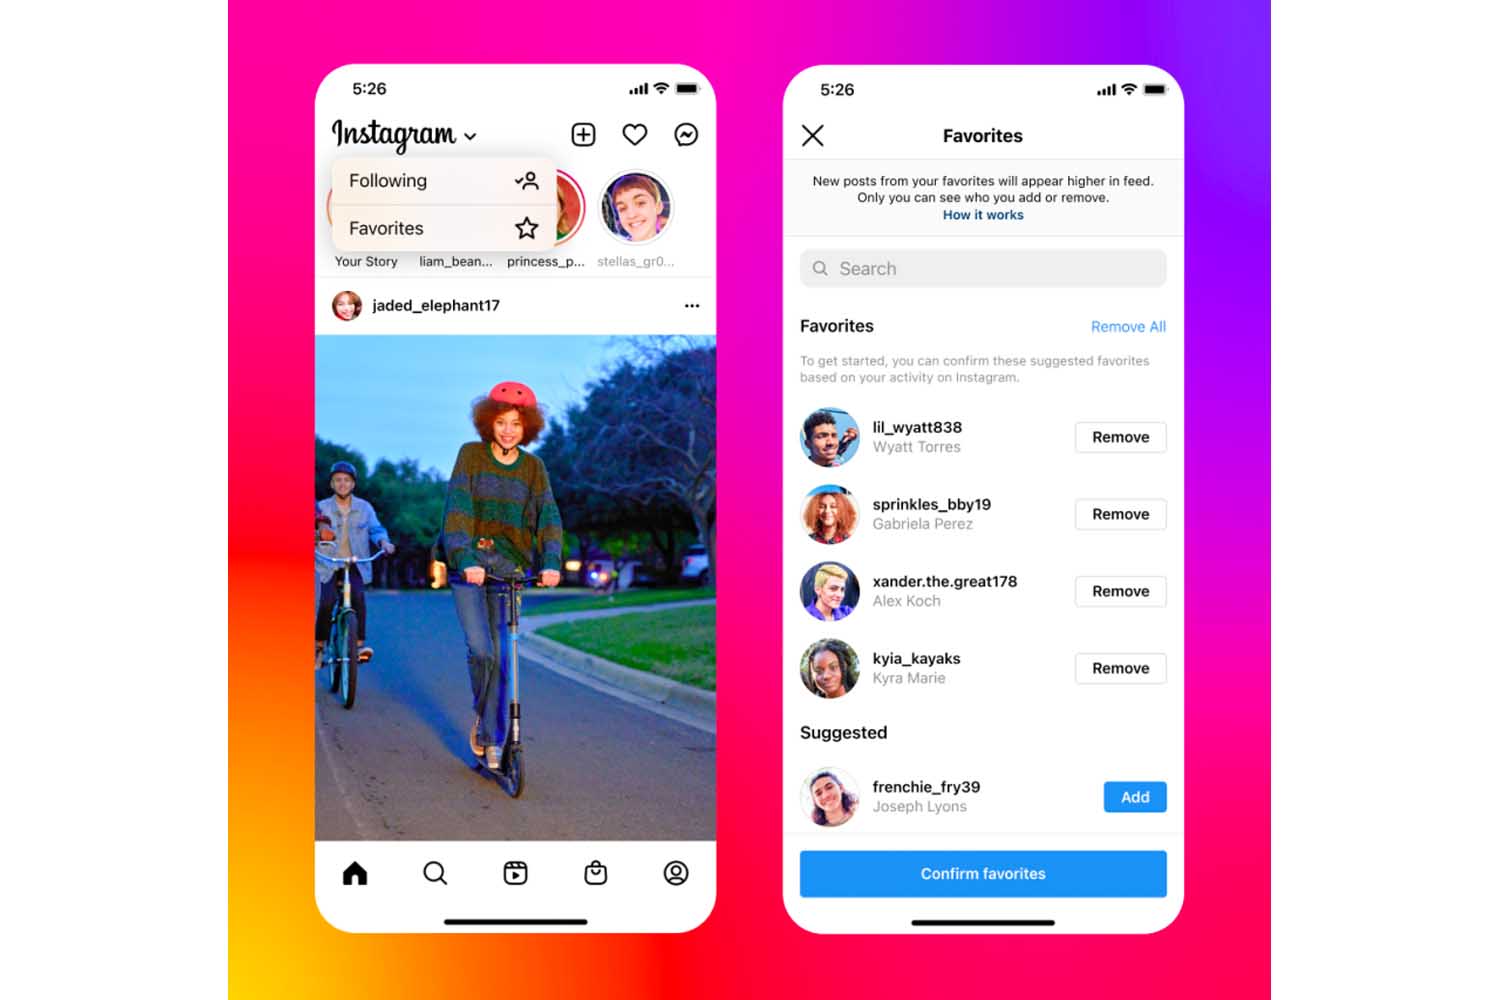 A screenshot of a smartphone showing Instagram's new Following and Favorites options for your feed, both released in March 2022.